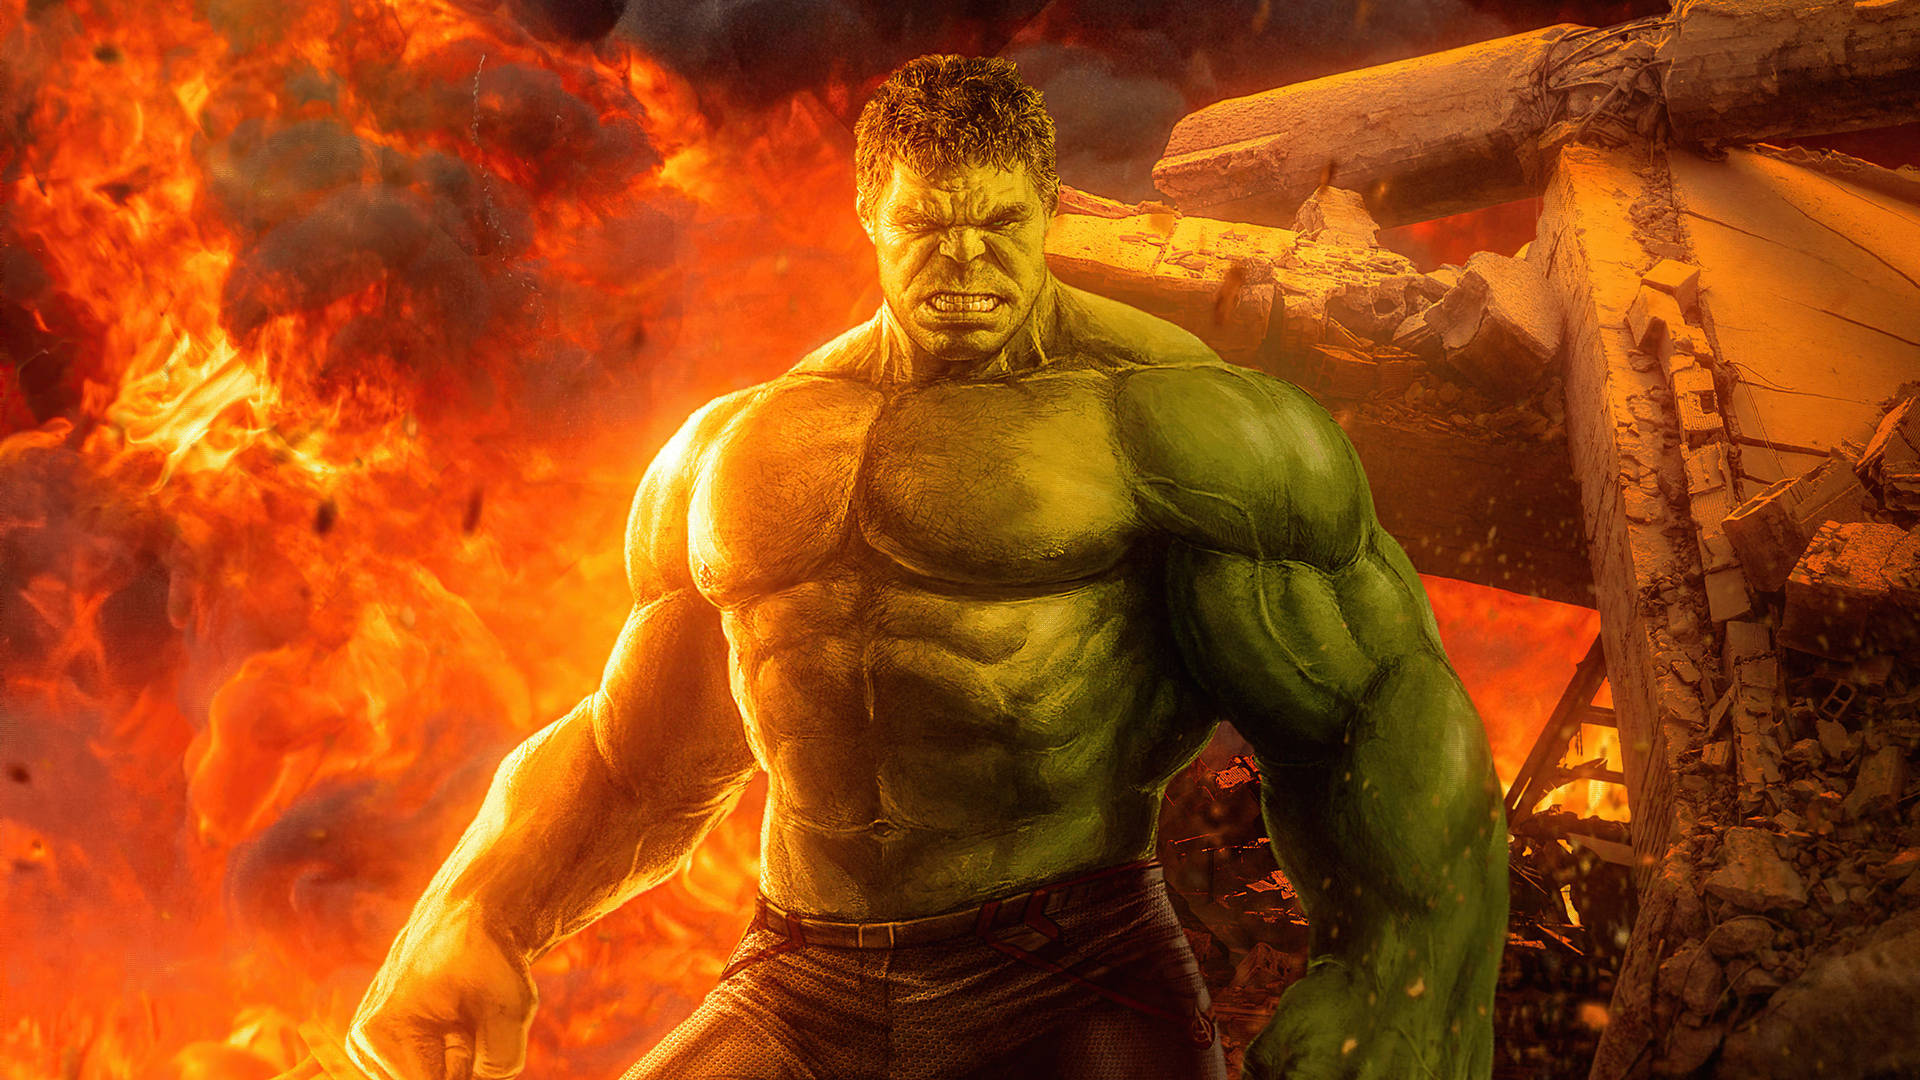 4k Hulk Standing Up Against Smoky Flame Background